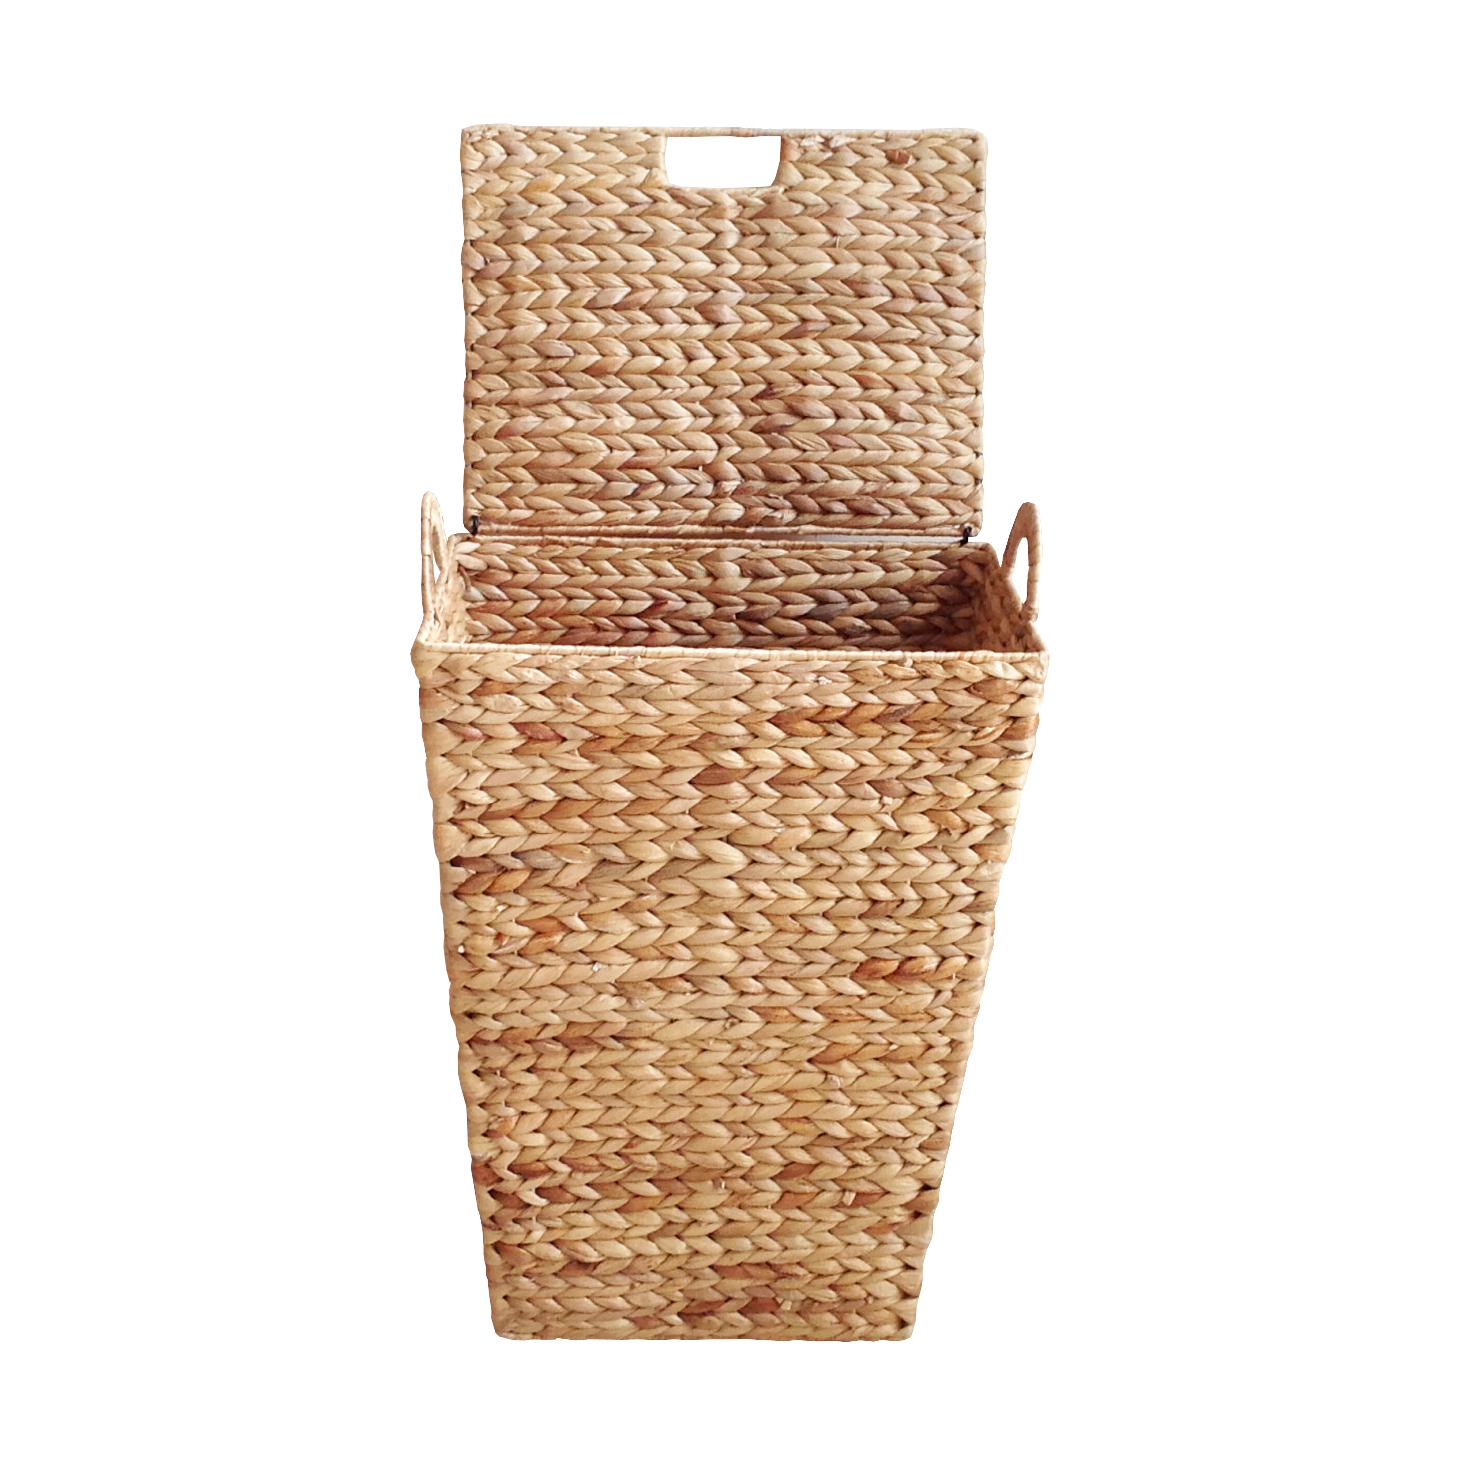 Good Price Rectangular Water Hyacinth Hamper Covered With Lids And 2 Small Baskets Handles On Both Sides Are Easy To Move 2